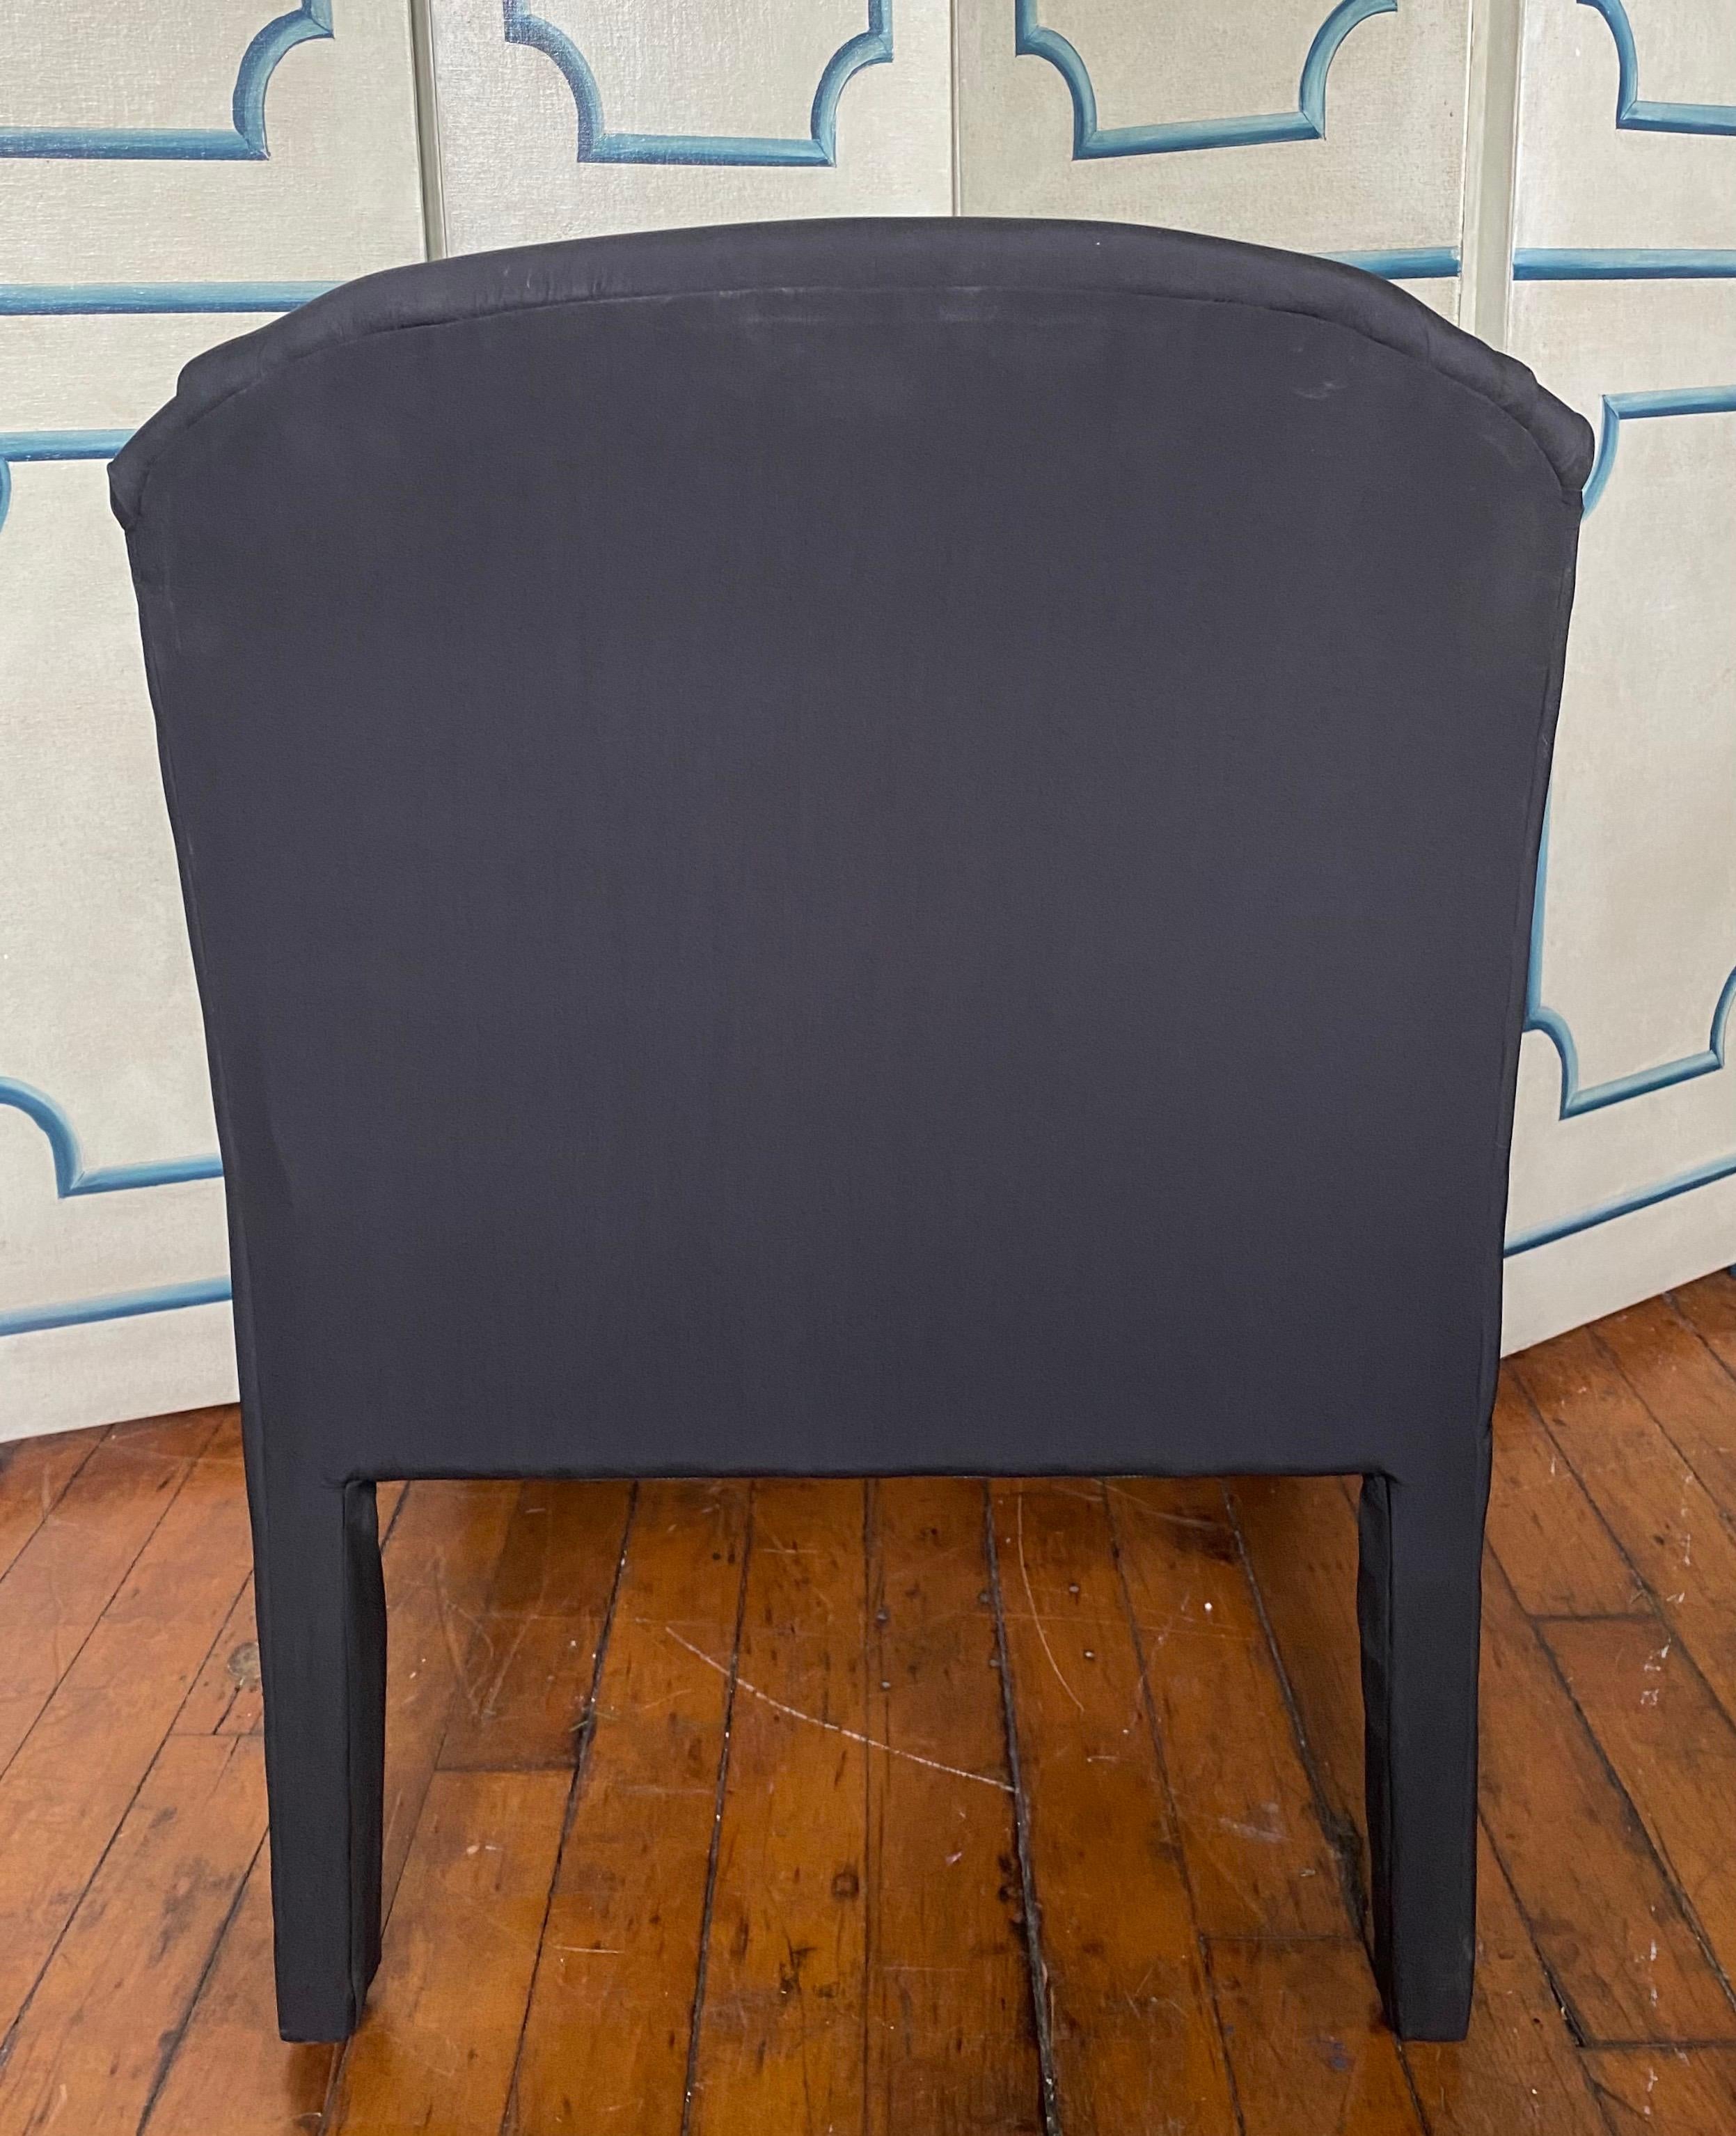 Upholstery 1980’s Post Modern Sculptural Black Upholstered Lounge Rounded Arm Chair For Sale